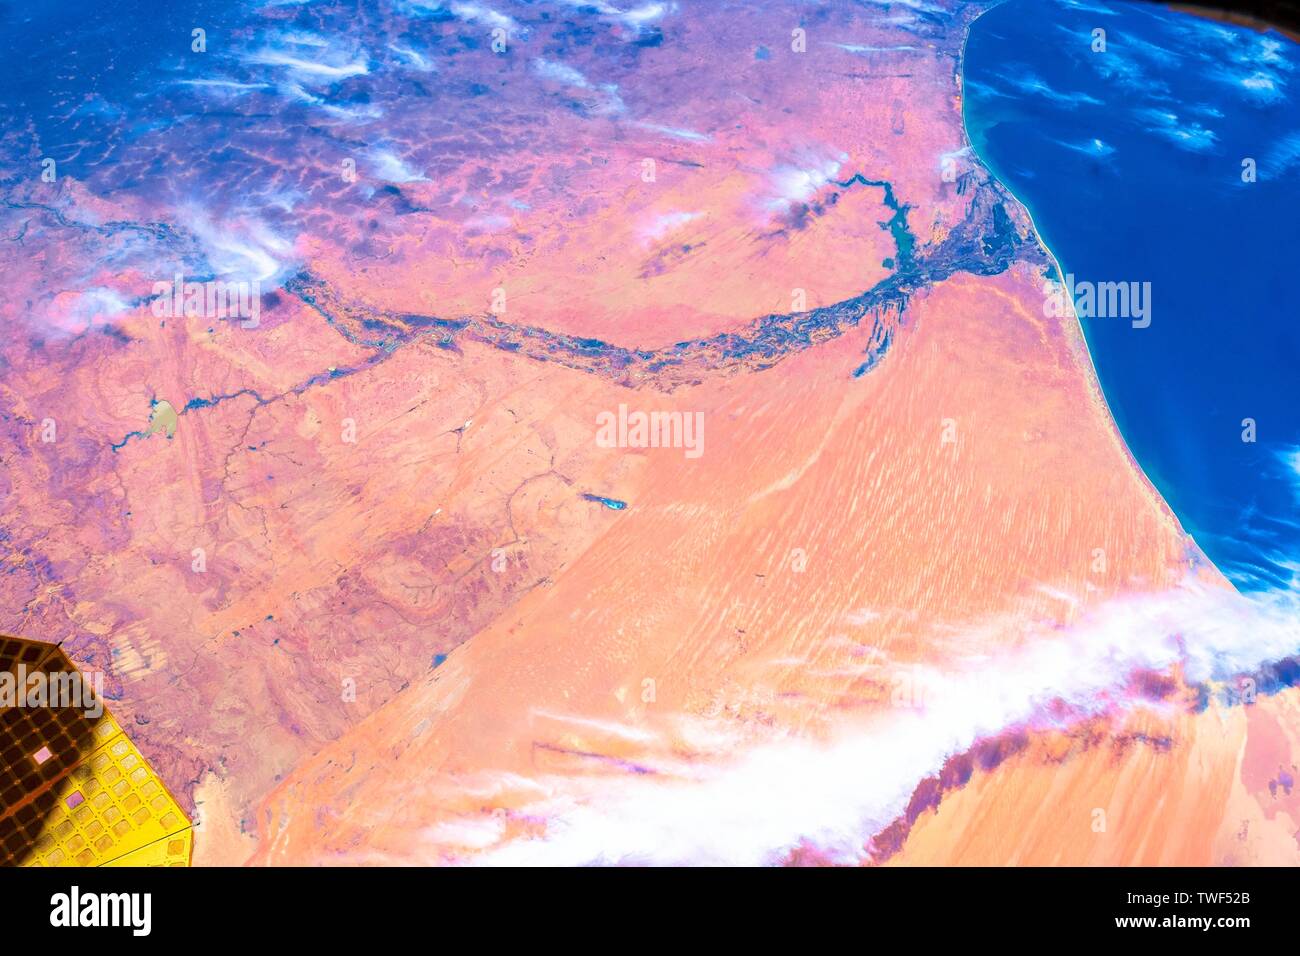 Over Mauritania. The beauty in nature of our planet Earth seen from the International Space Station (ISS). The image is a public domain handout by NAS Stock Photo